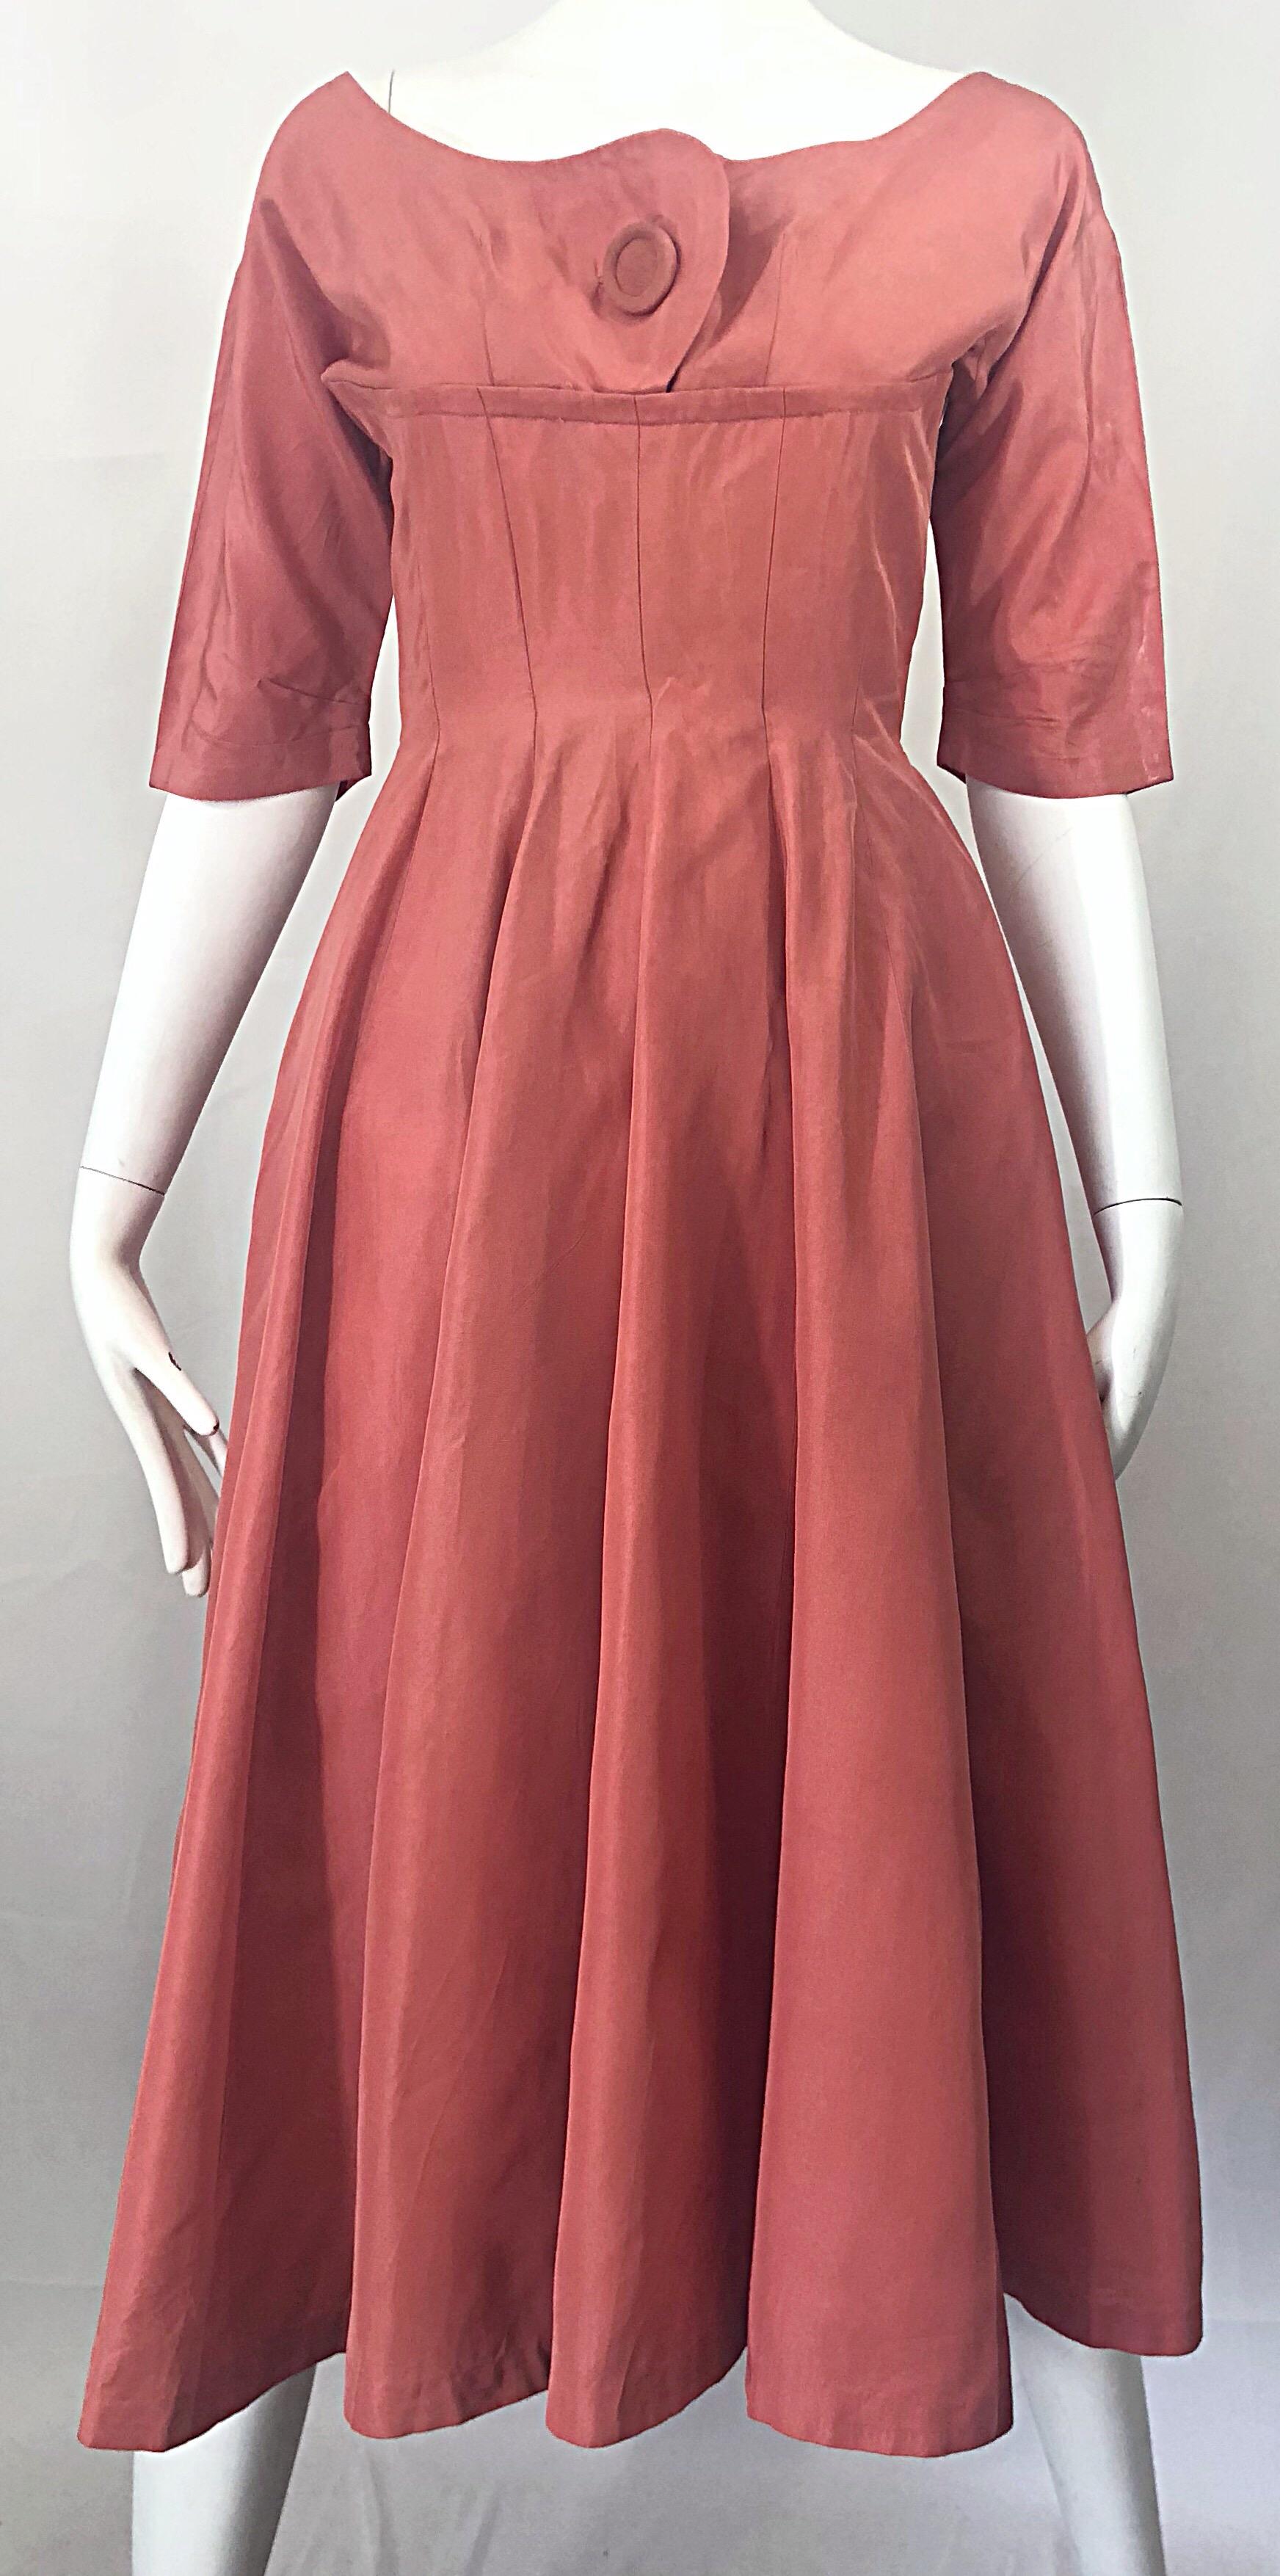 1950s Gigi Young Salmon Coral Pink Silk Taffeta Vintage 50s Fit n Flare Dress For Sale 1